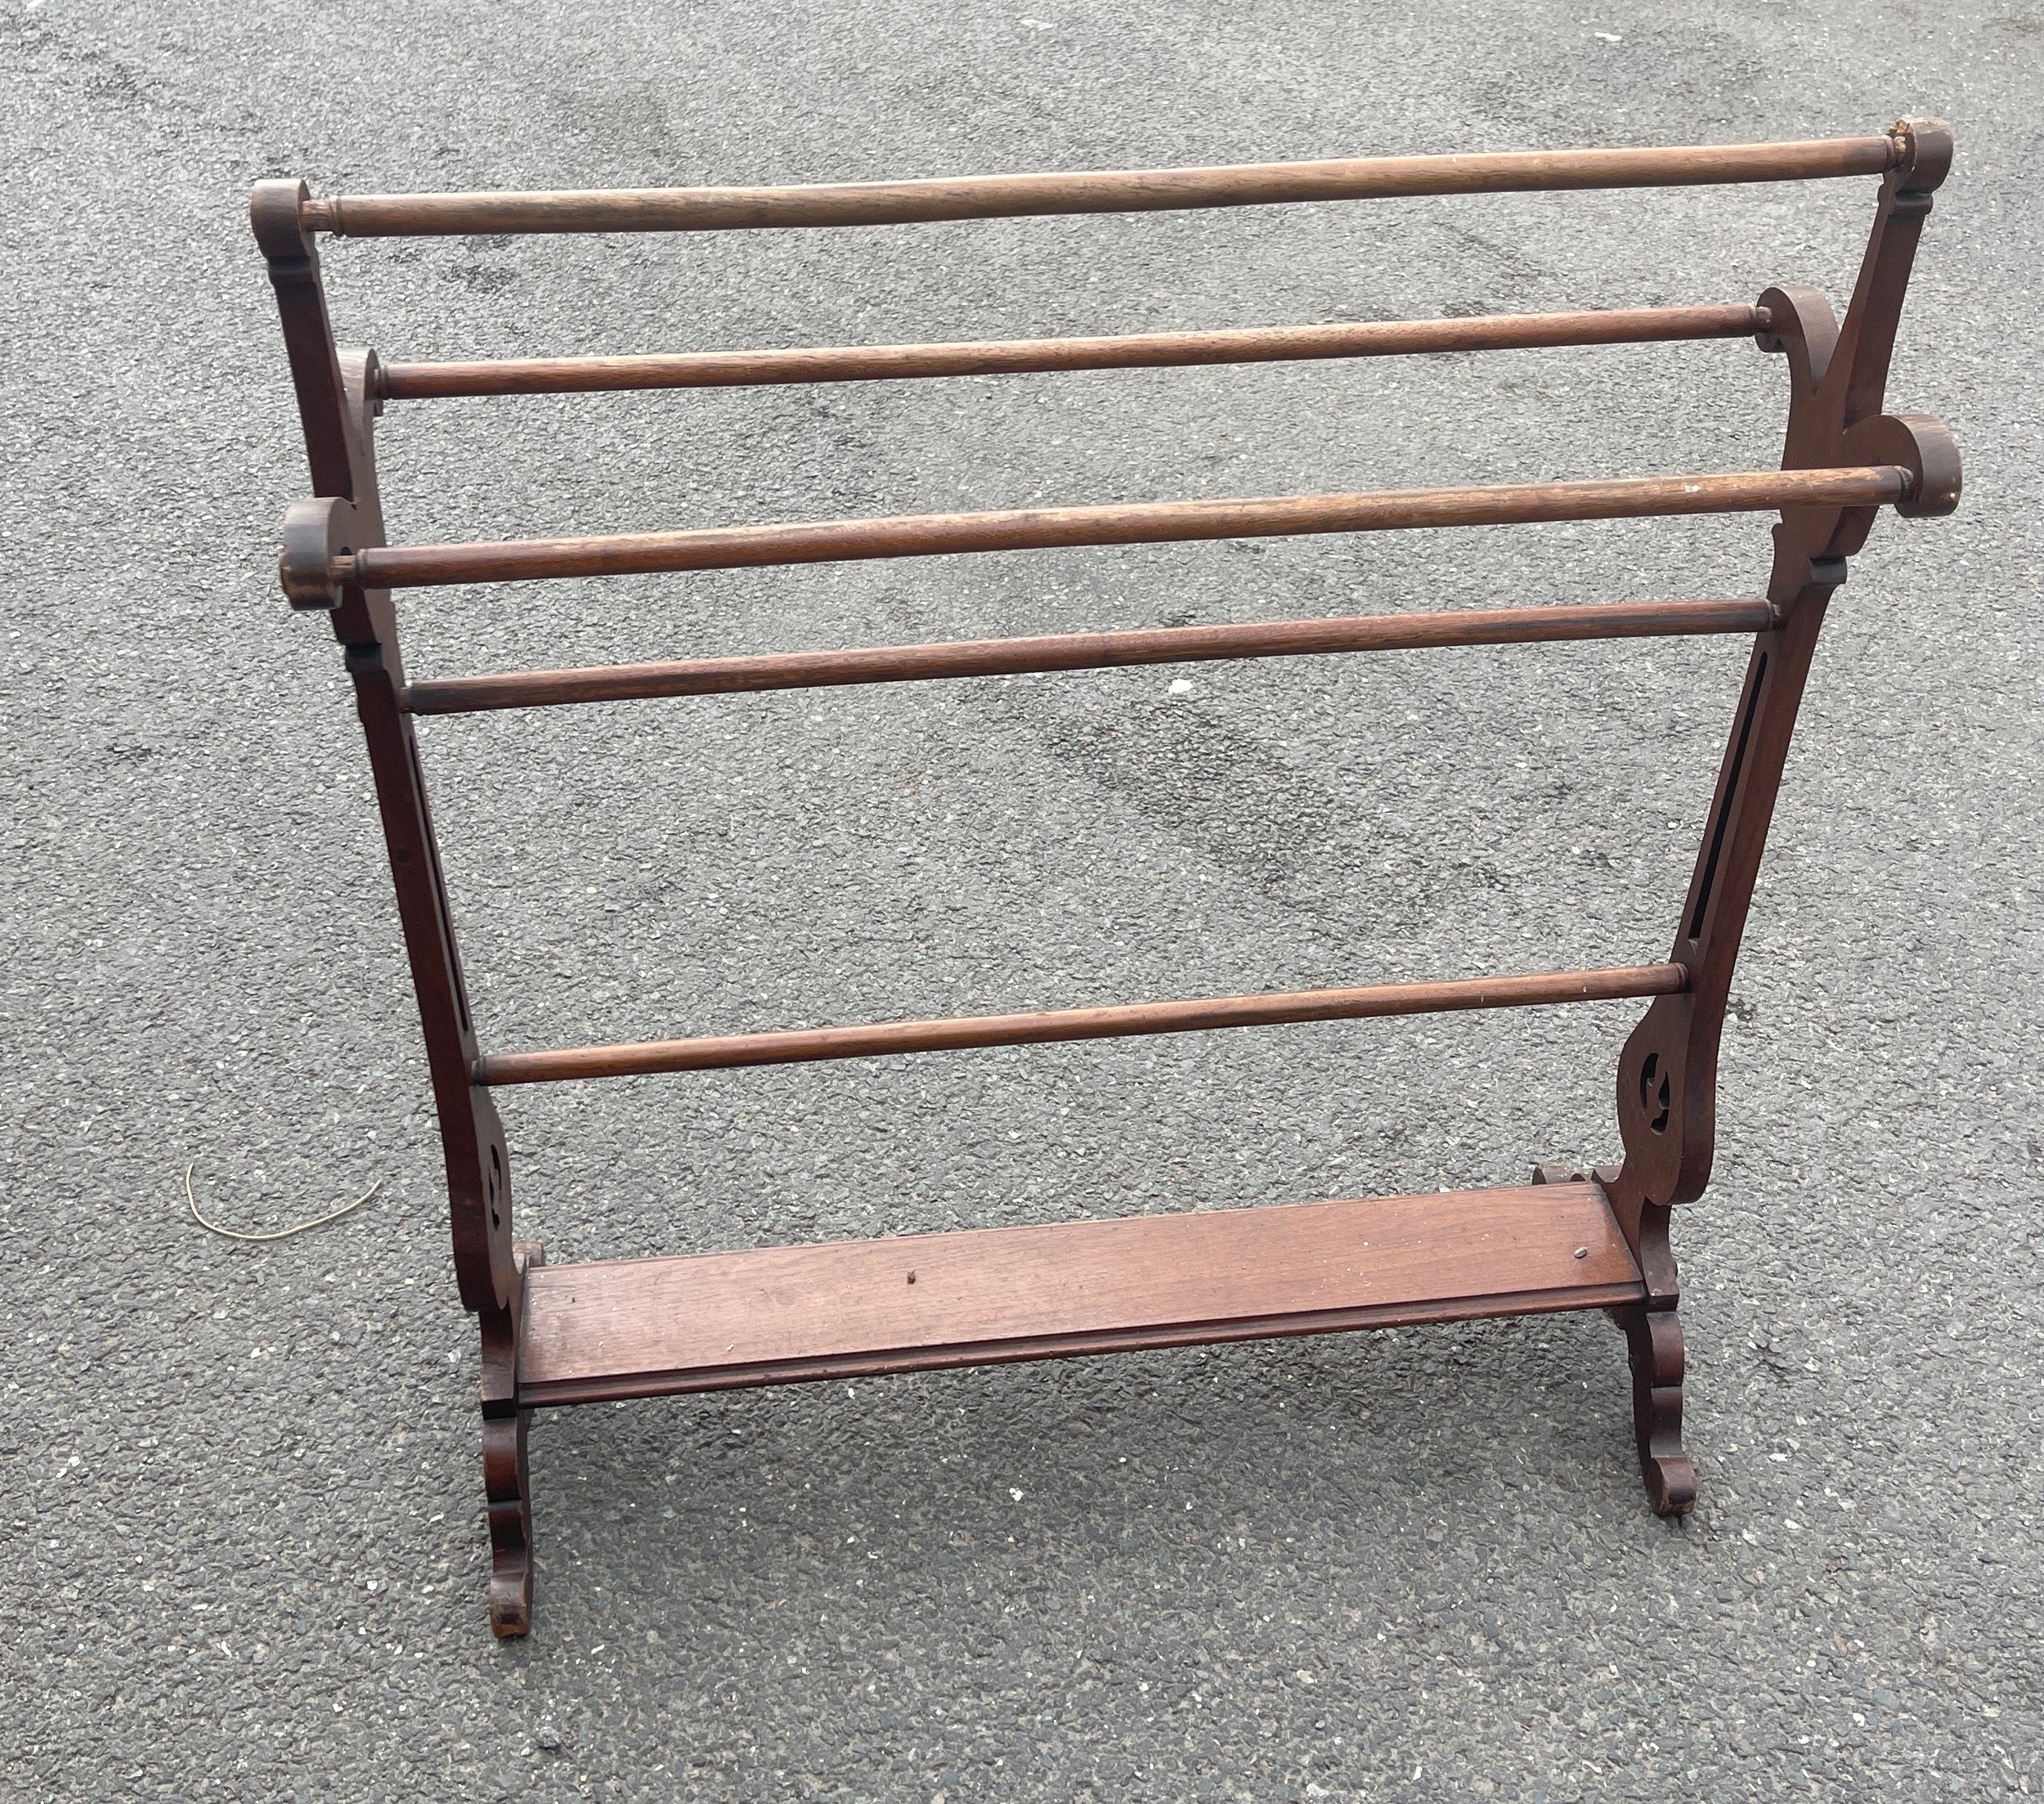 Mahogany towel rack measures approx height 36 inches high and 32 inches wide